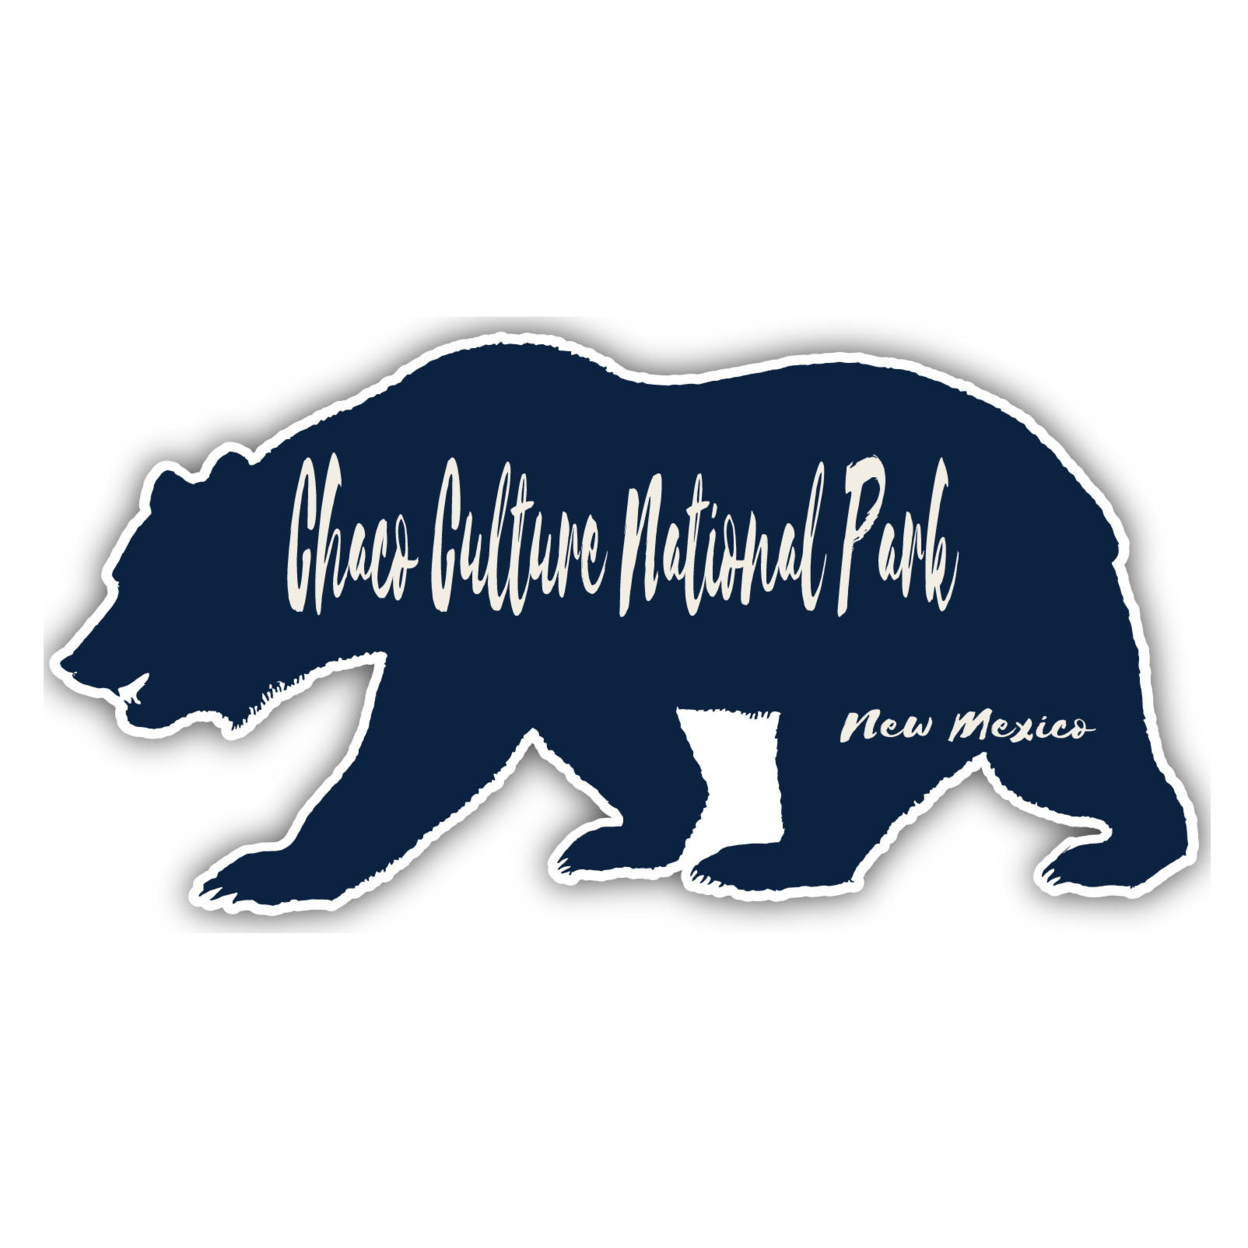 Chaco Culture National Park New Mexico Souvenir Decorative Stickers (Choose Theme And Size) - 4-Pack, 2-Inch, Bear